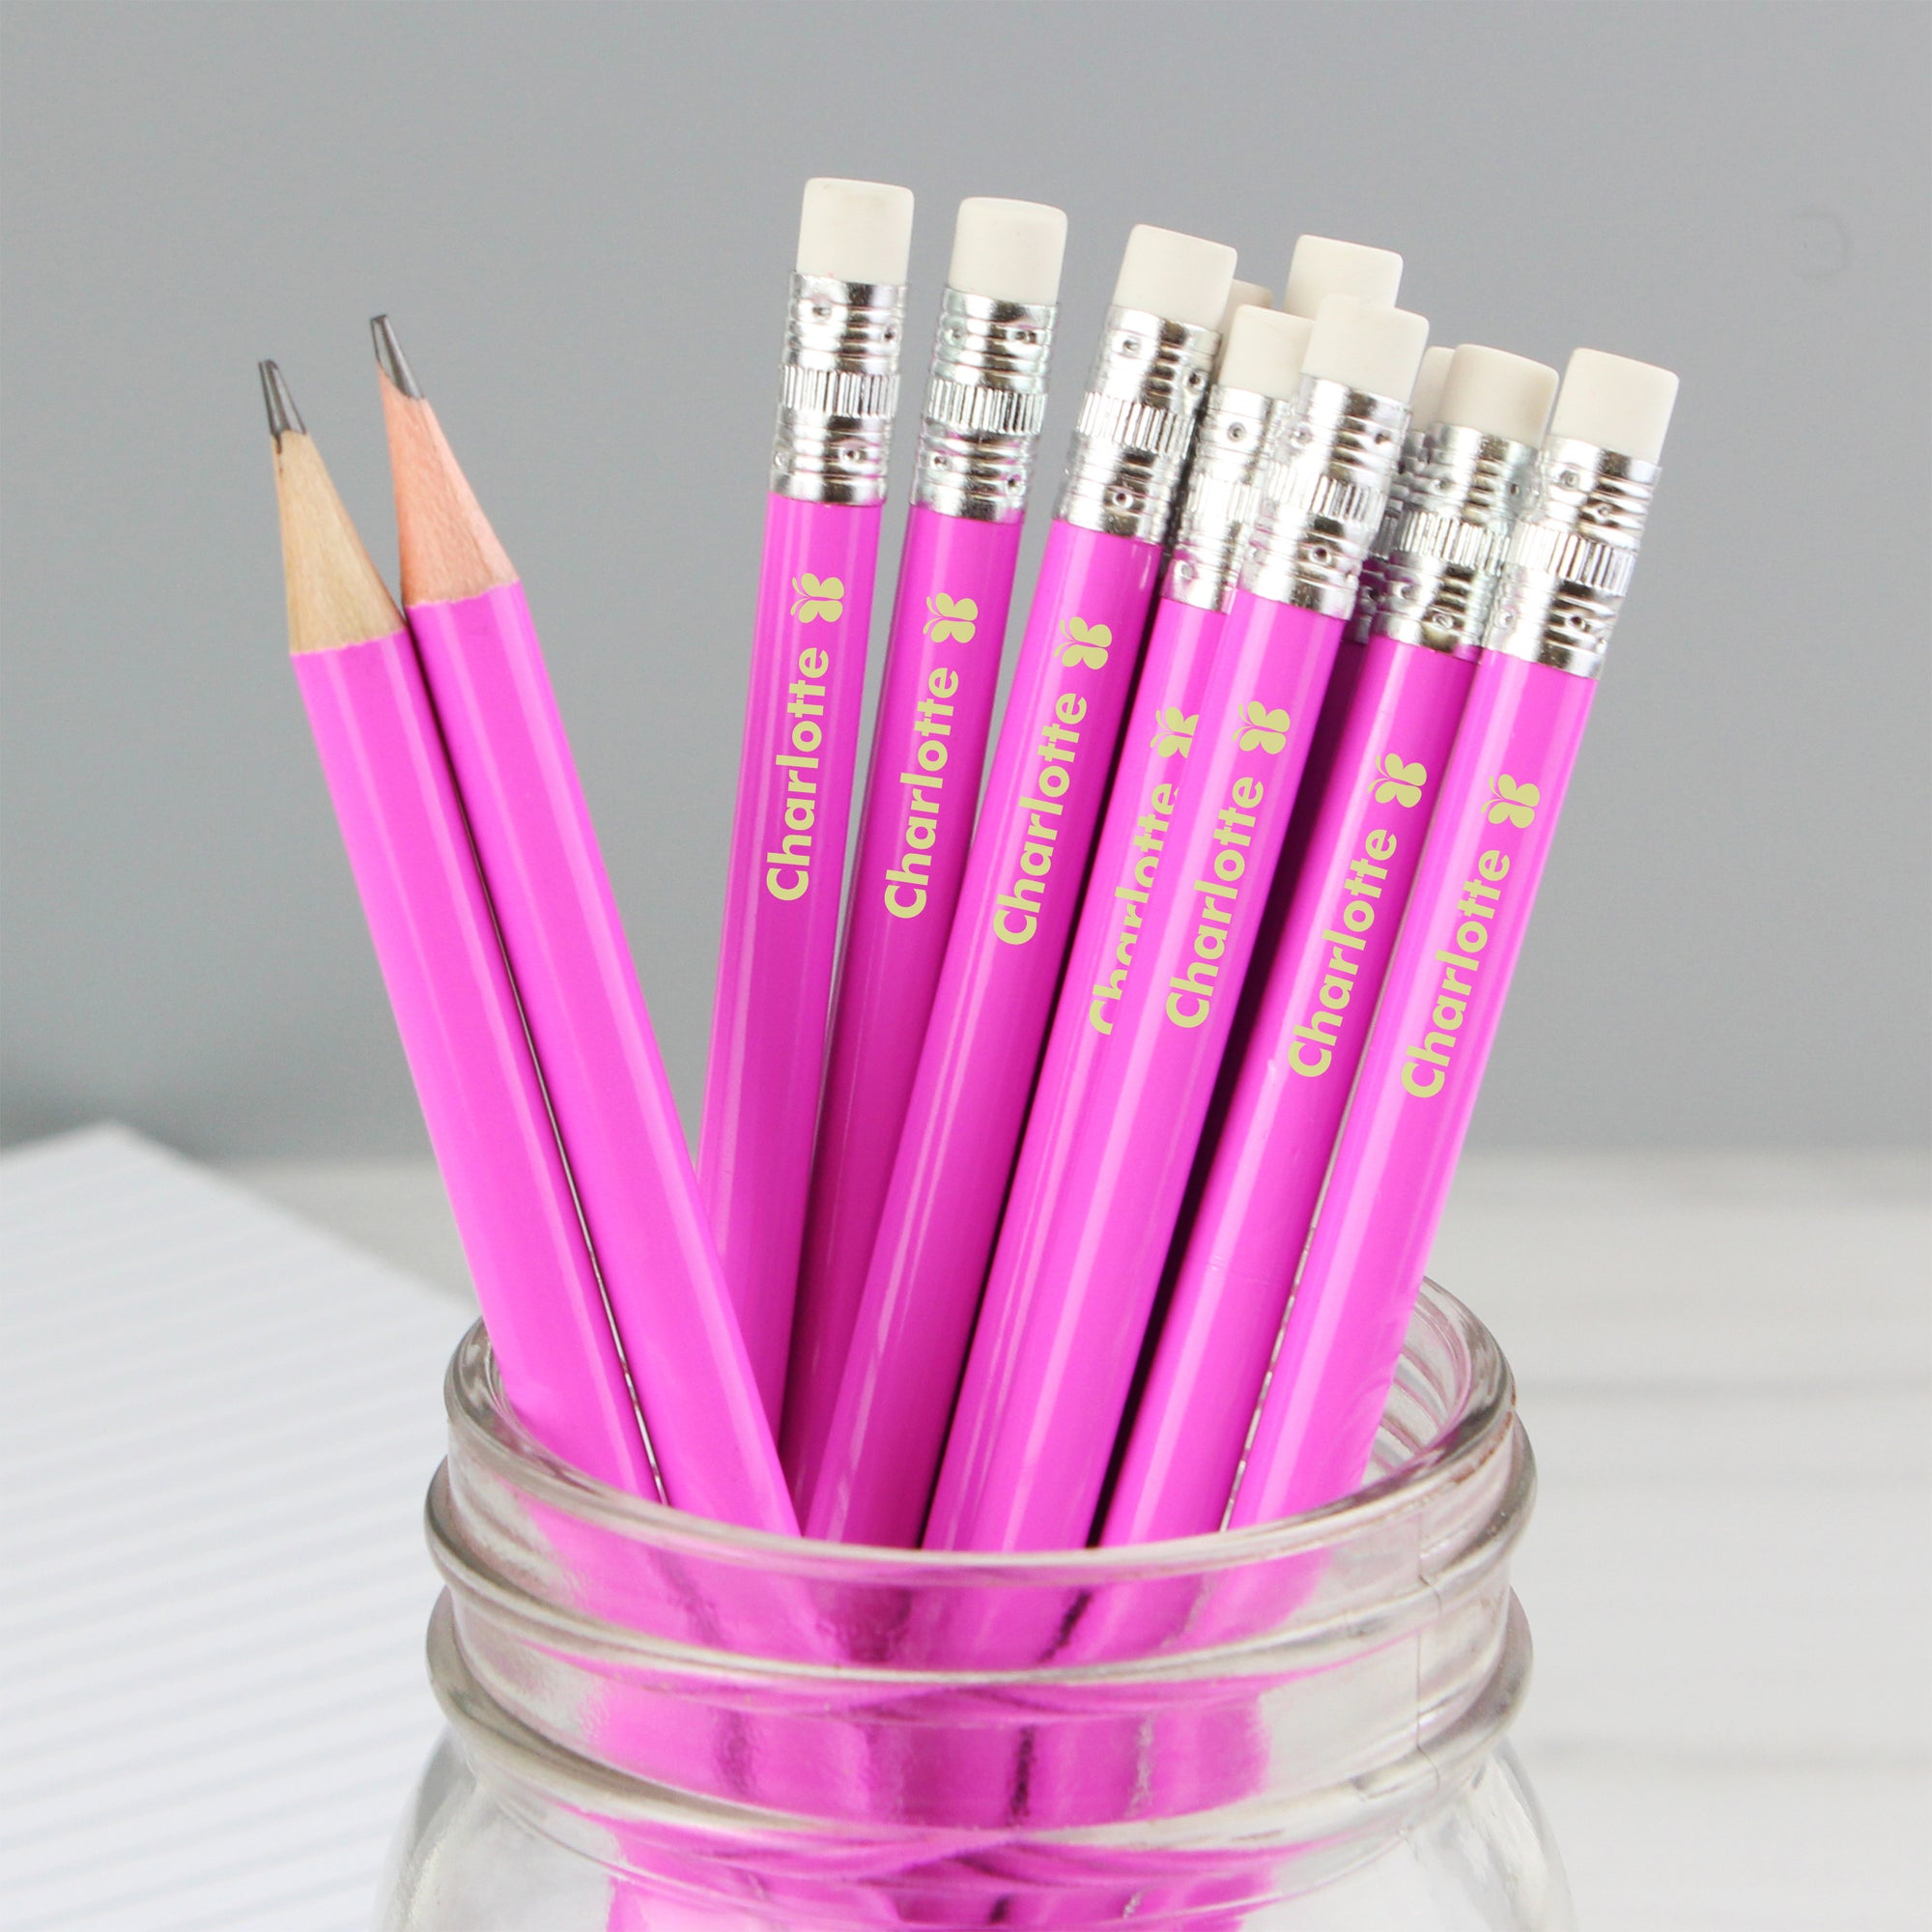 Set of 12 personalised HB pink pencils topped with an eraser and with a small butterfly motif after the name.